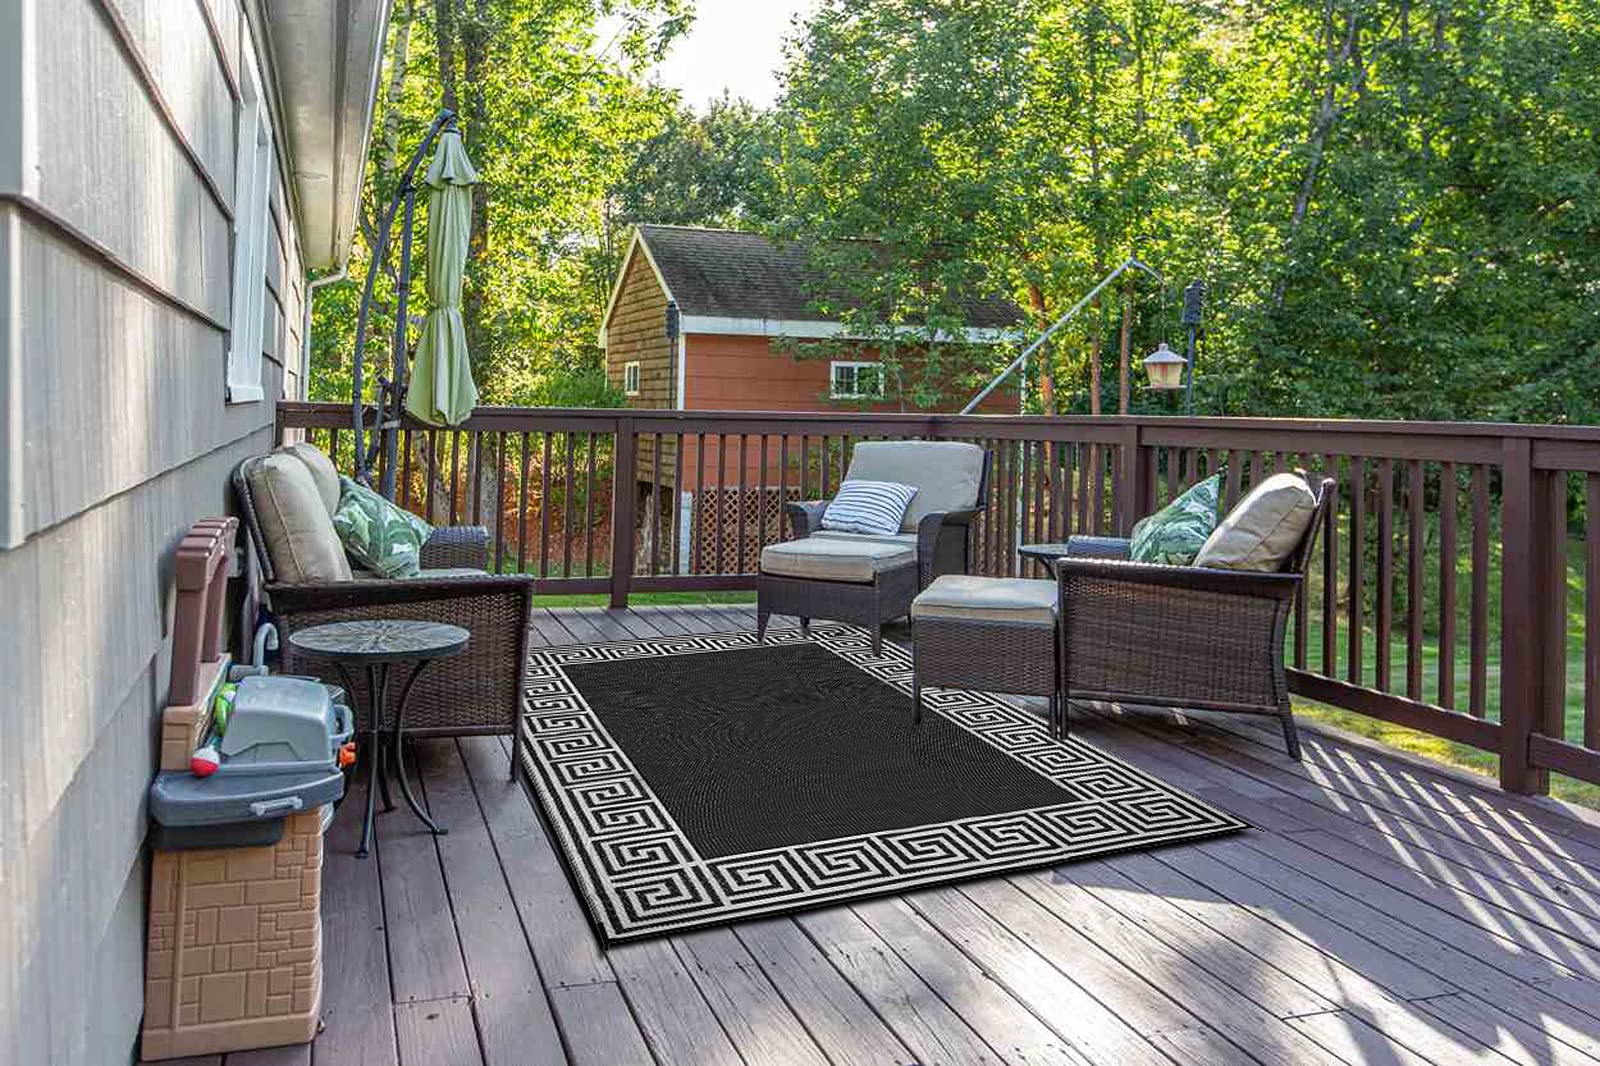 CAMP SOLUTIONS Outdoor Rugs 9 x 12 FT, Outdoor Plastic Straw Rug for Patio Decor, Reversible Mats for Indoor and outdoor